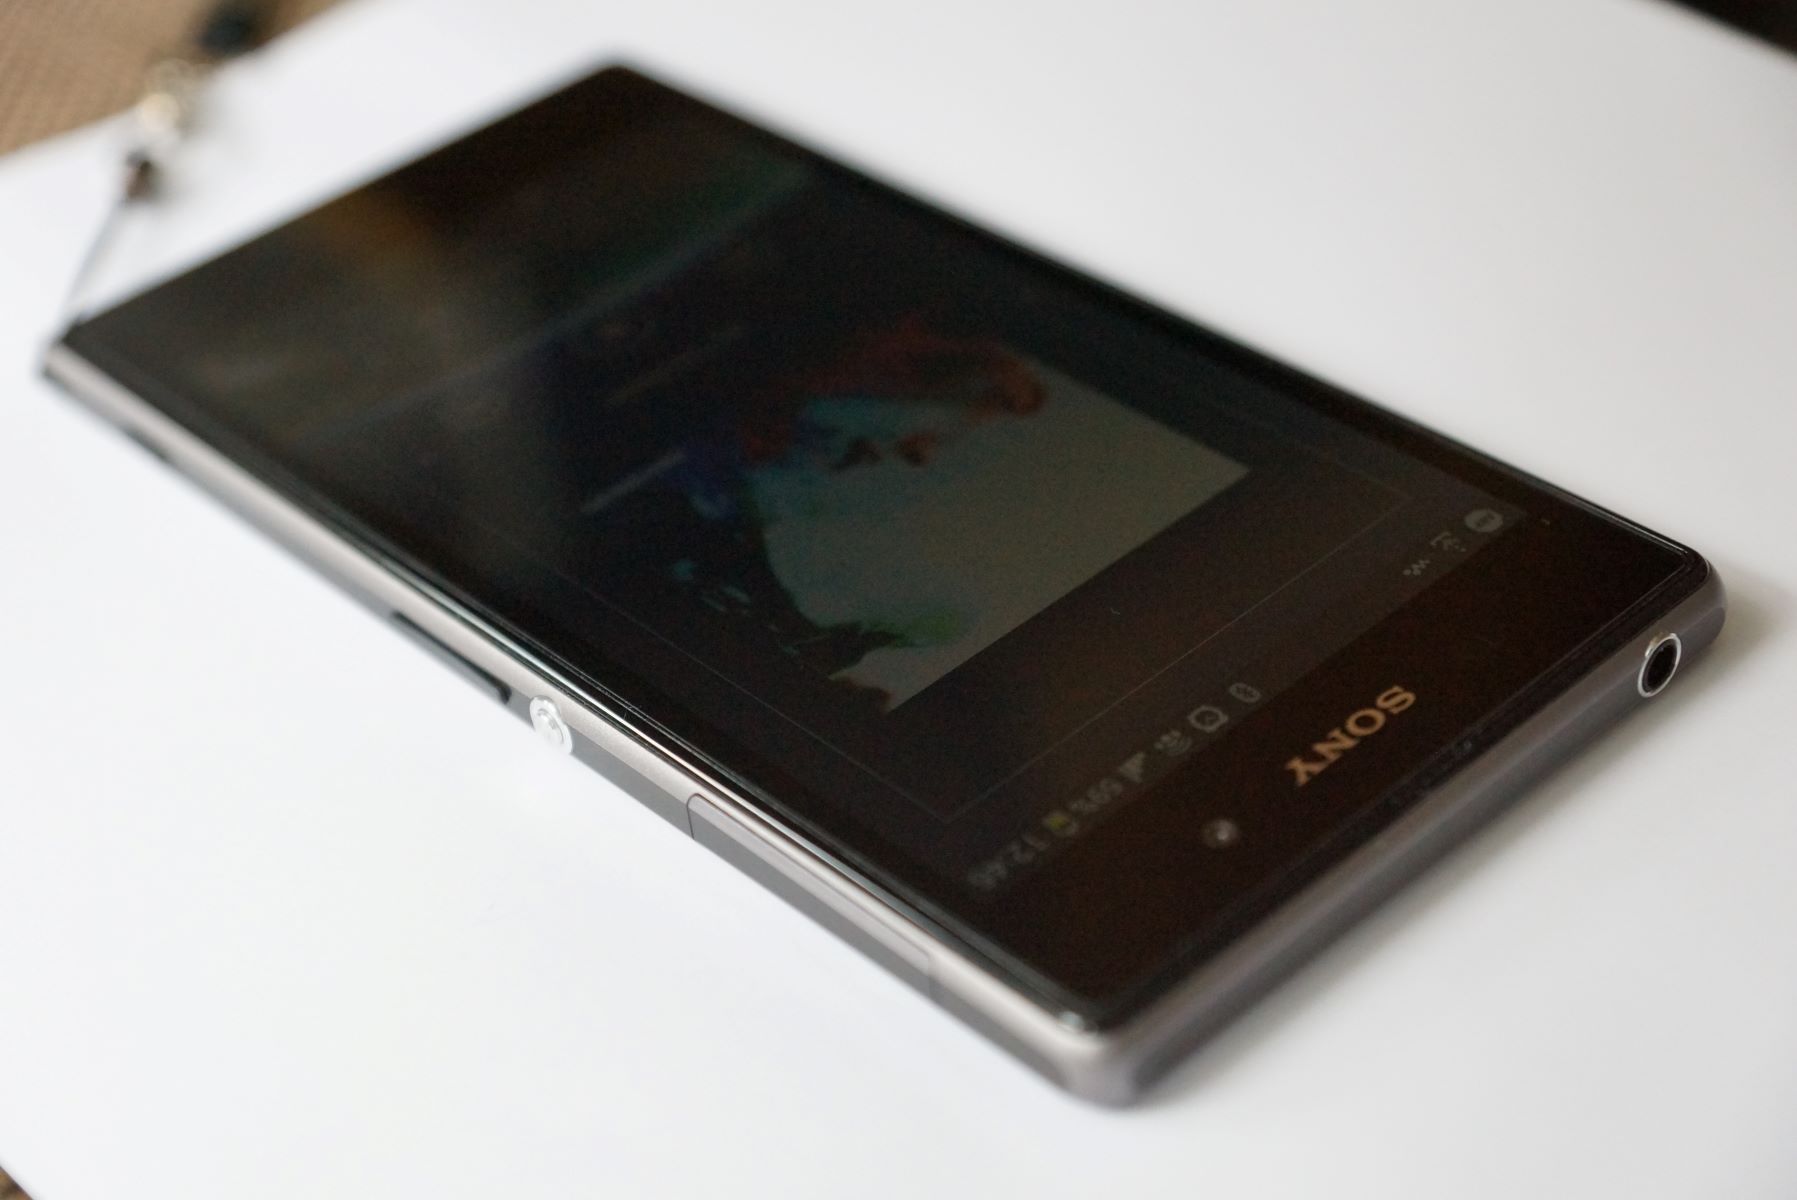 Troubleshooting Xperia Z1: Fixing Power Issues